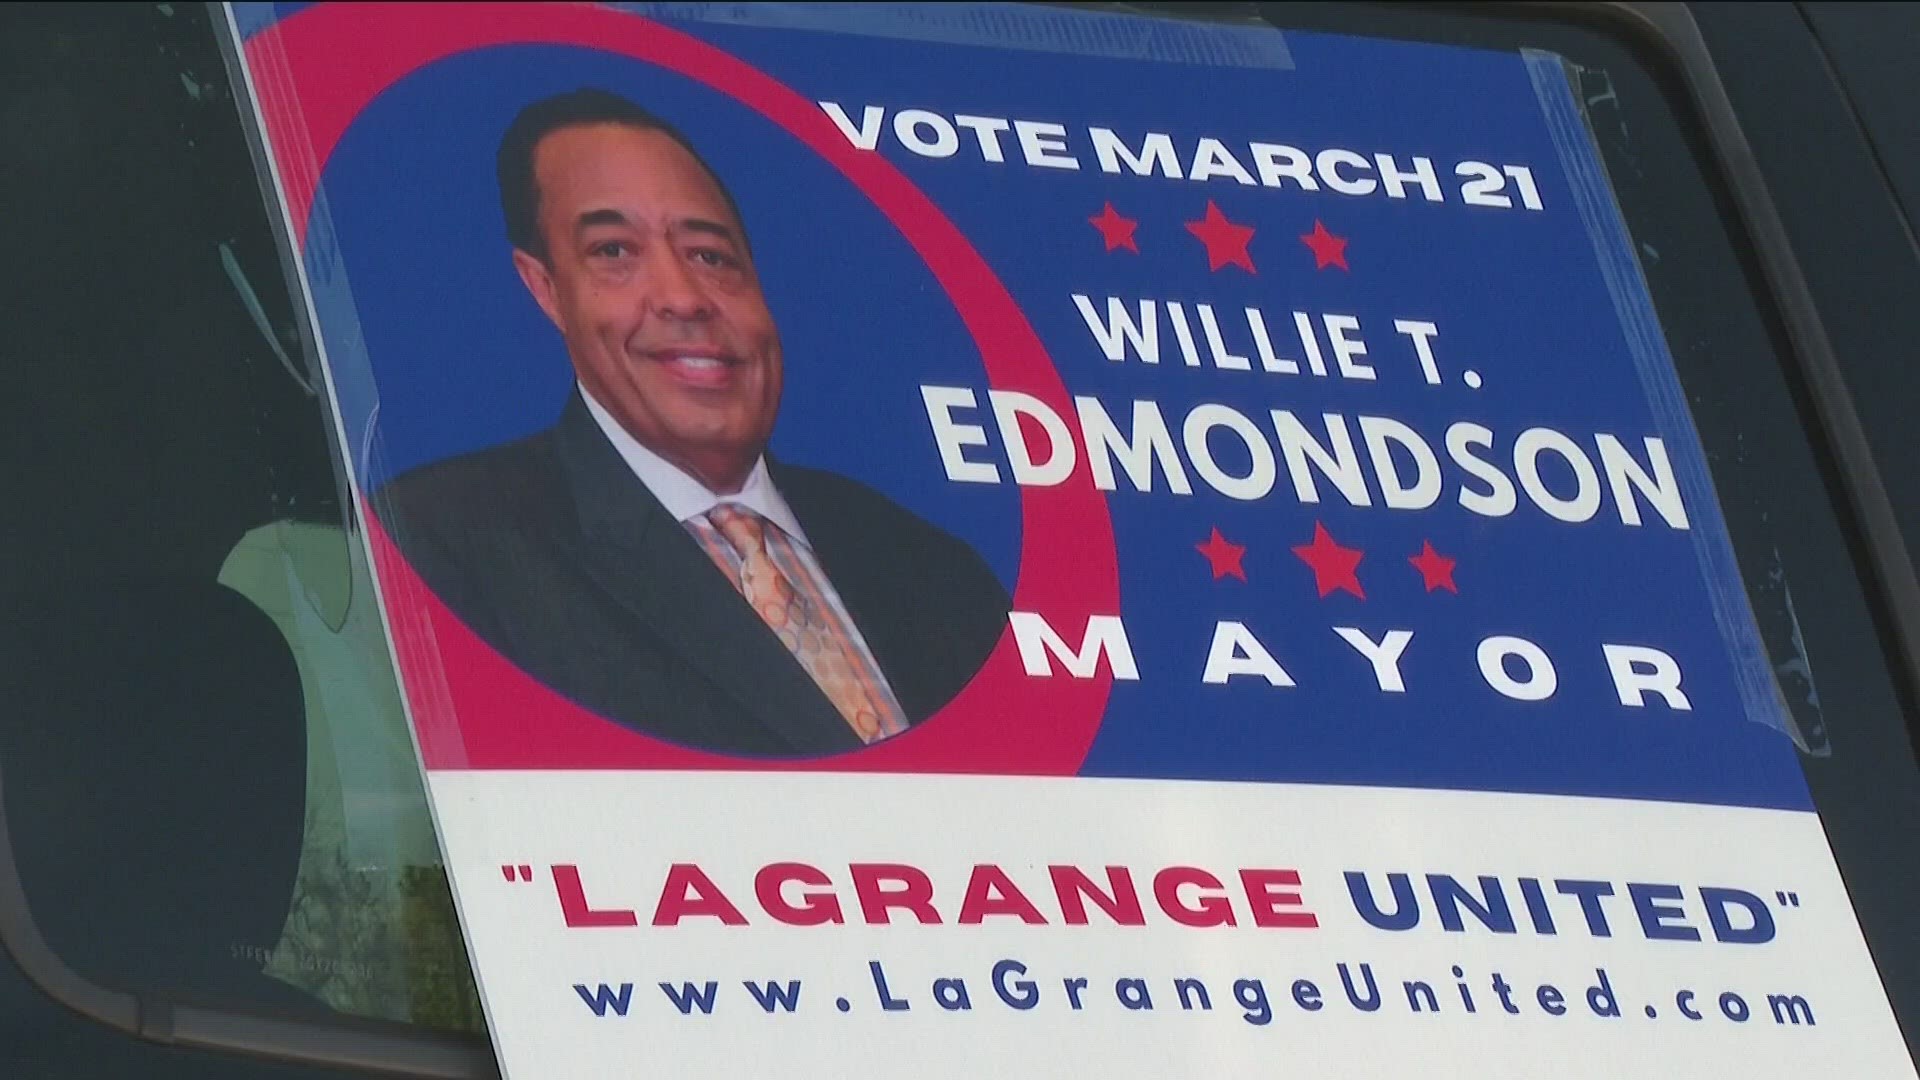 Despite severe weather, Troup County is still planning a ceremony for Mayor-elect Willie T. Edmondson, who will be the city's first Black mayor.